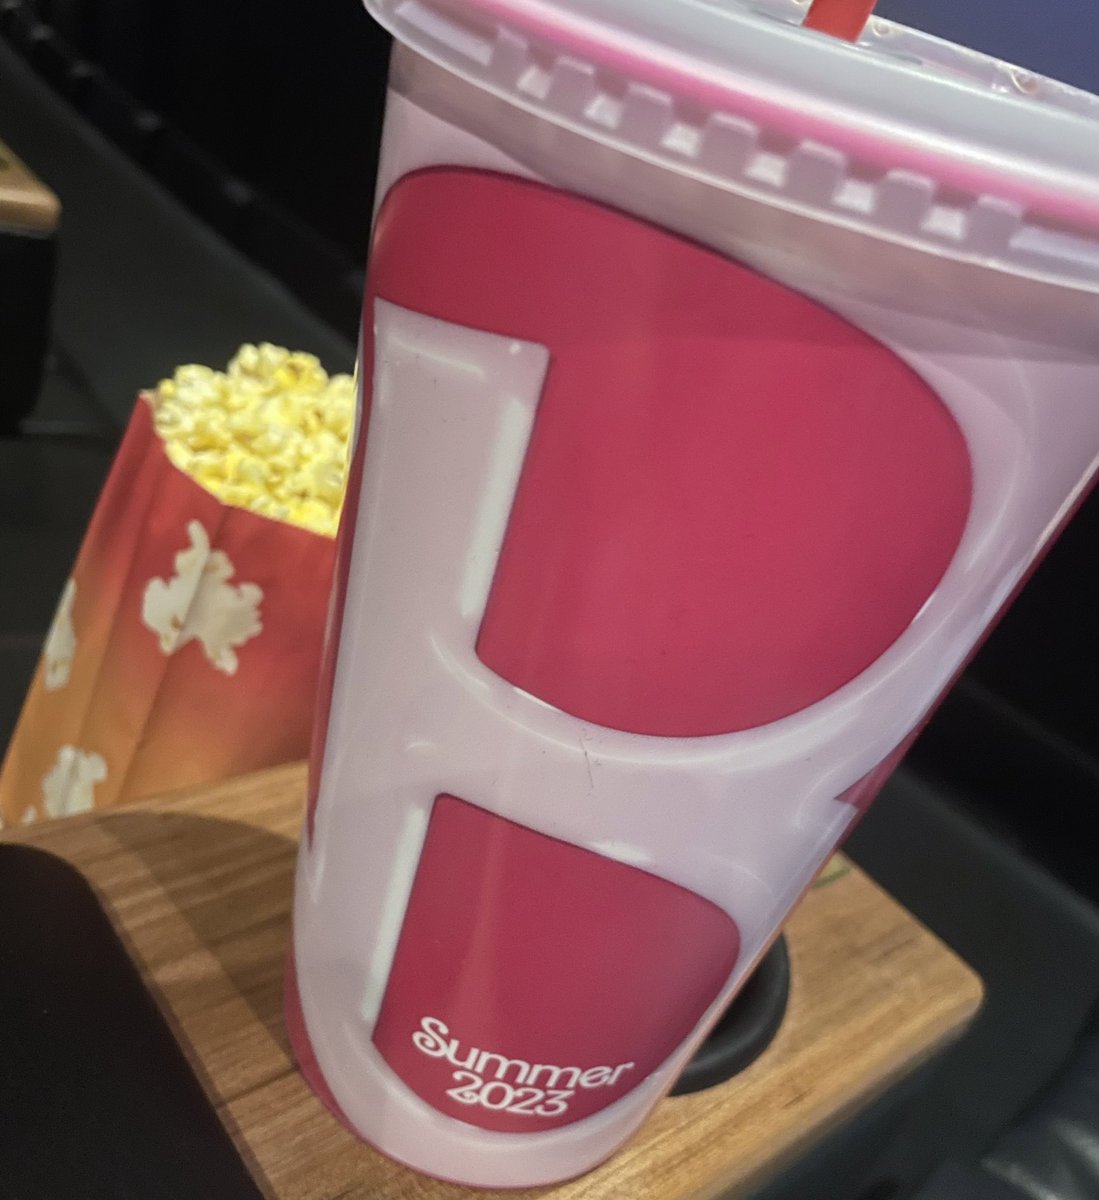 THIS ISN’T A DRILL I GOT A BARBIE CUP AT THE MOVIE THEATER